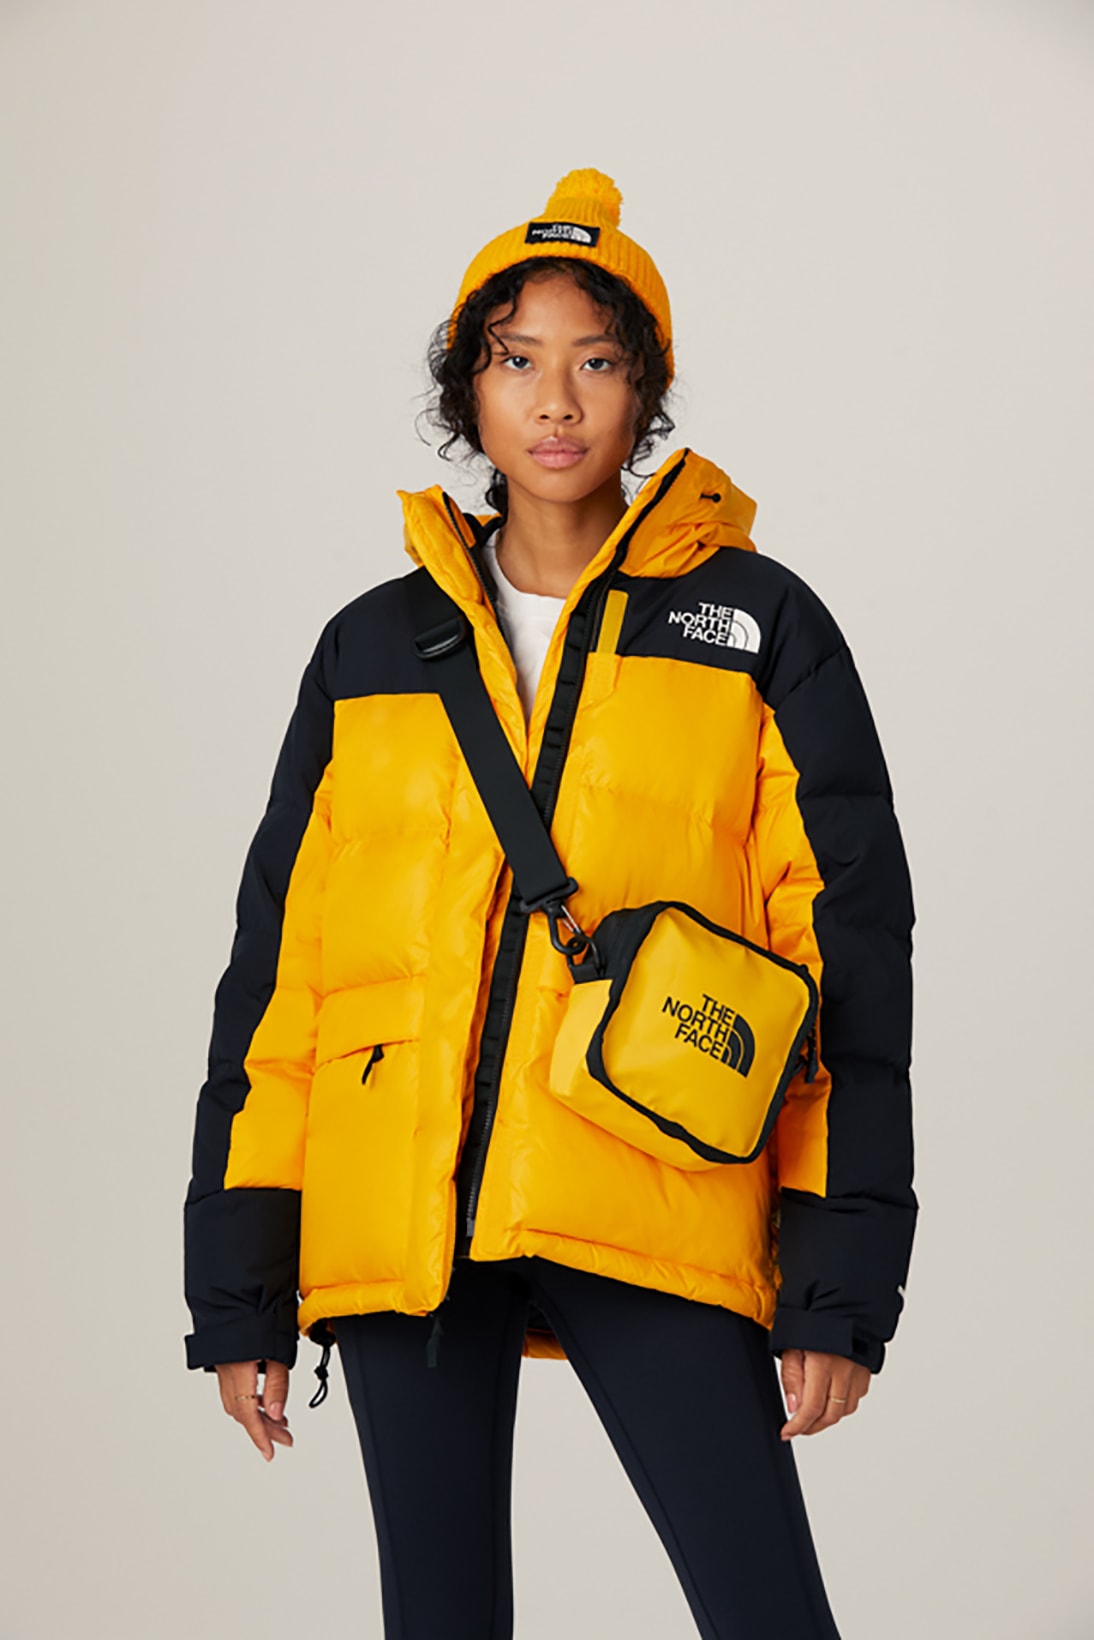 the north face fall winter collection jackets parka outerwear bags beanies yellow summit gold colorway